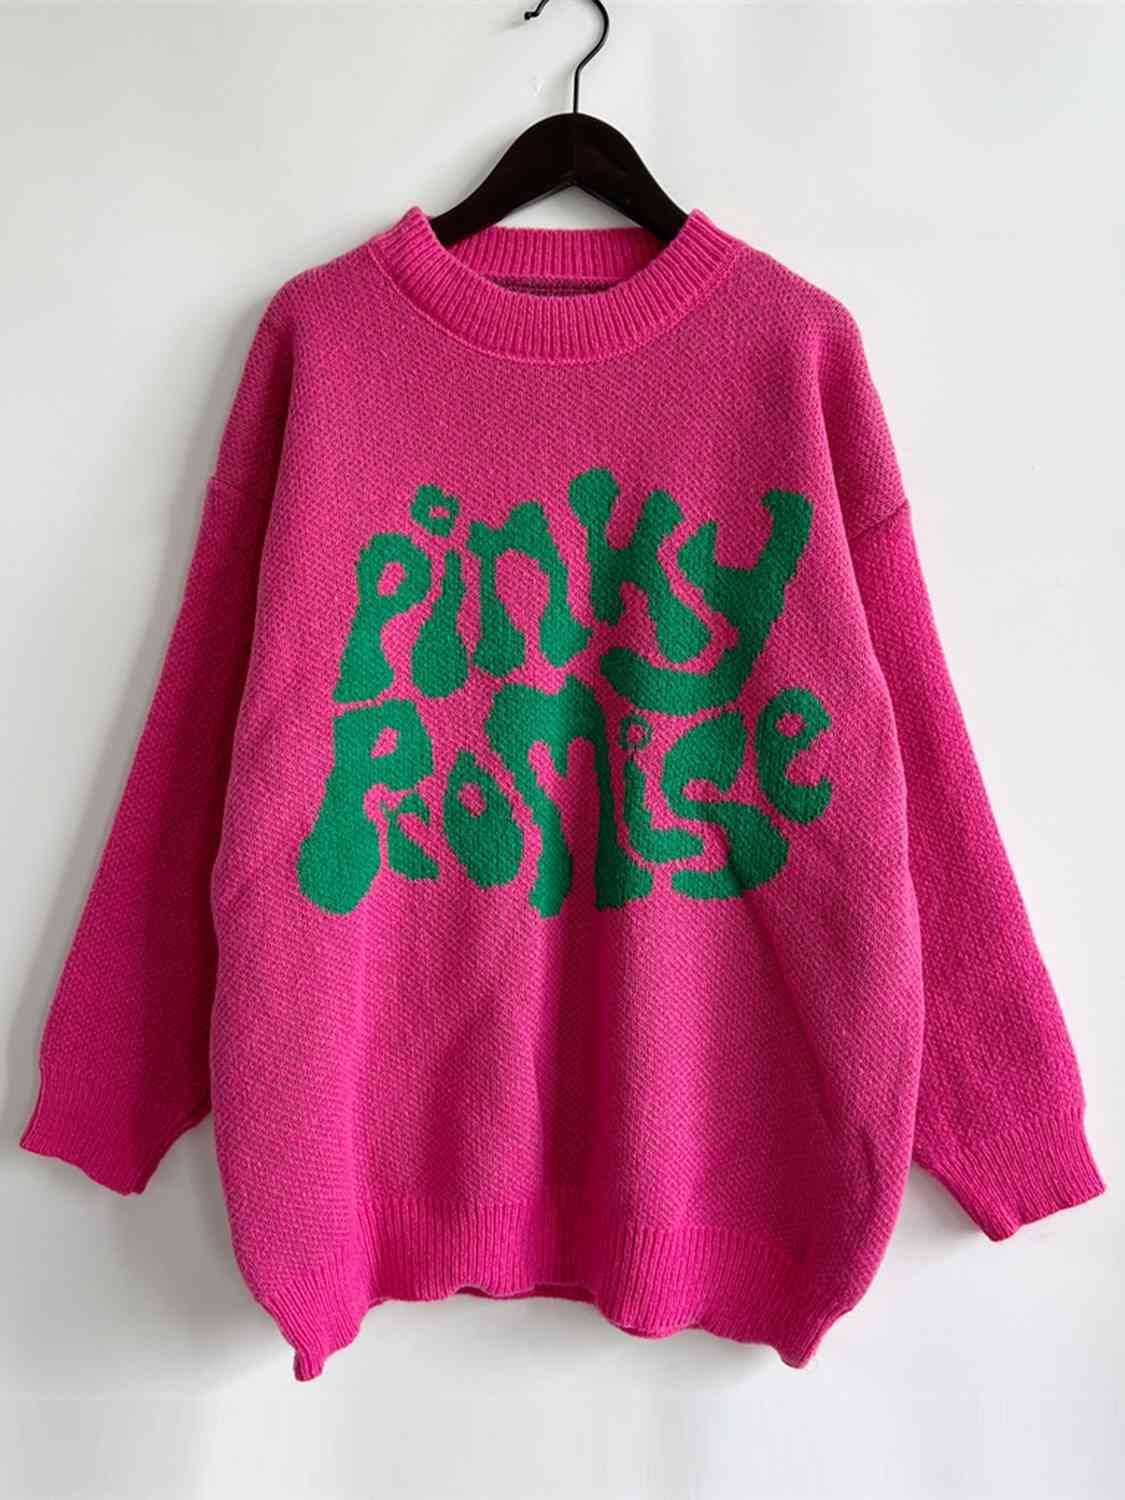 PINKY PROMISE Sweater